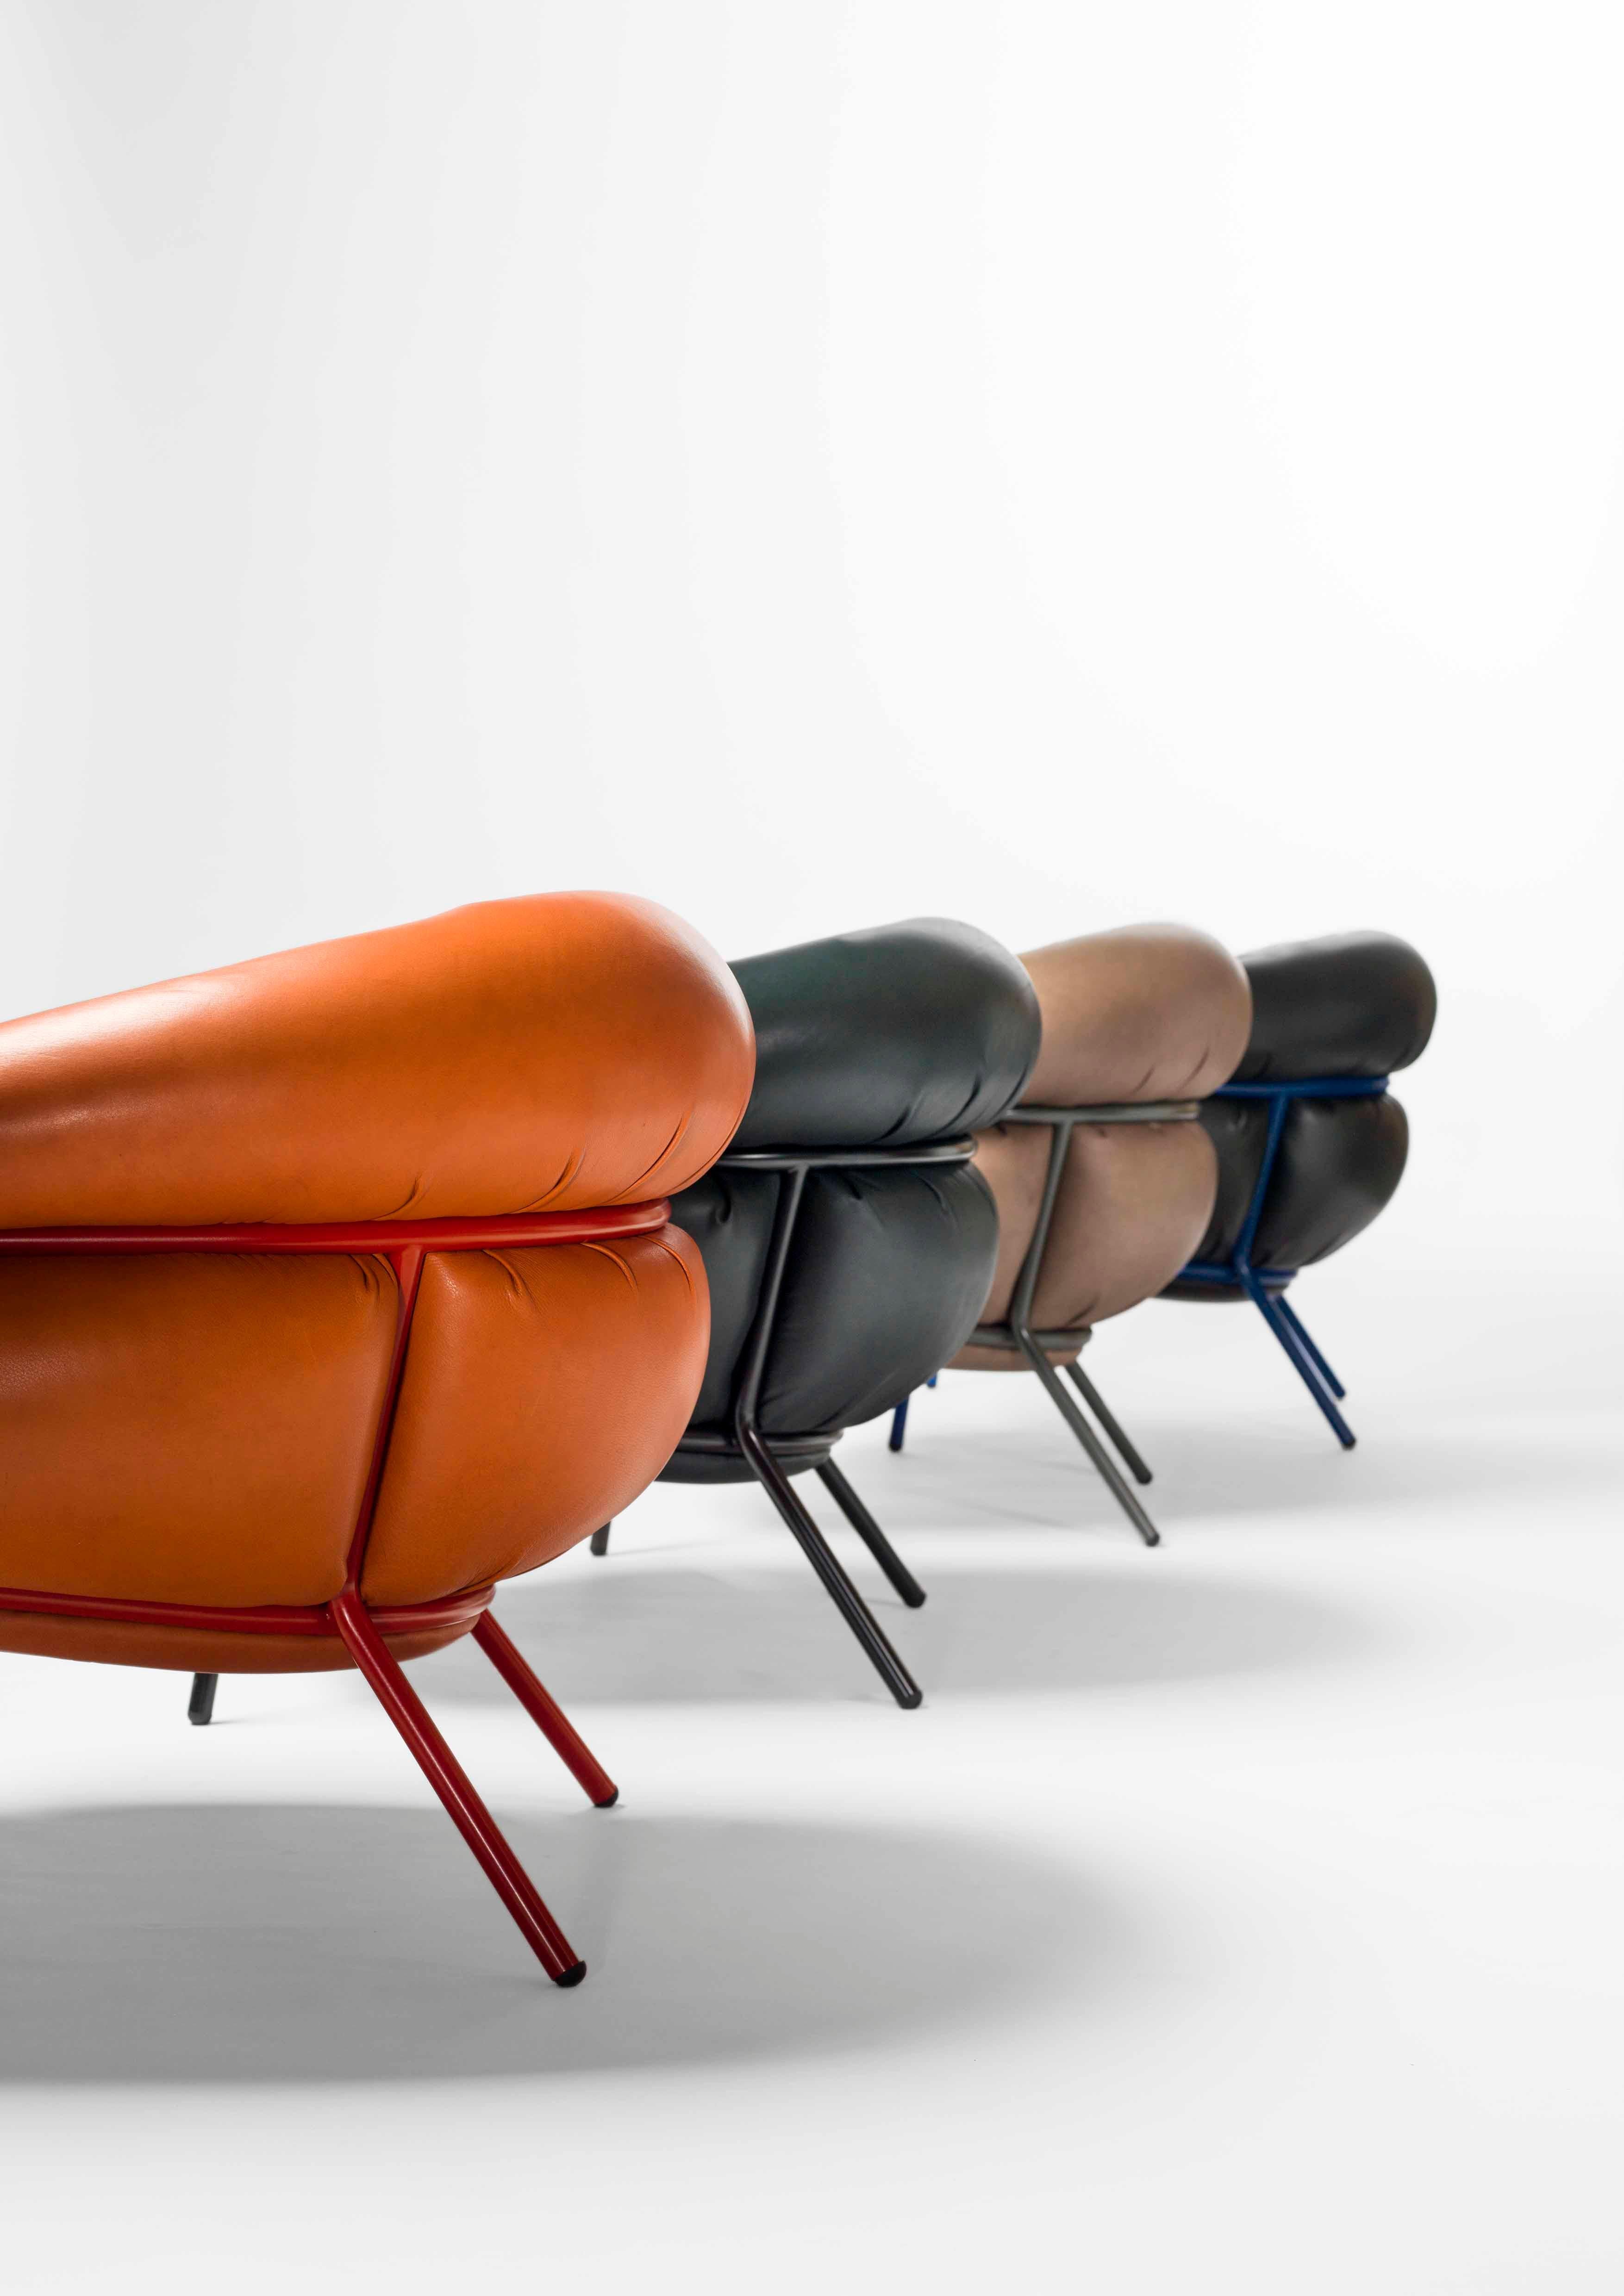 Modern Grasso armchair + footstool by Stephen Burks organge leather red metal structure For Sale